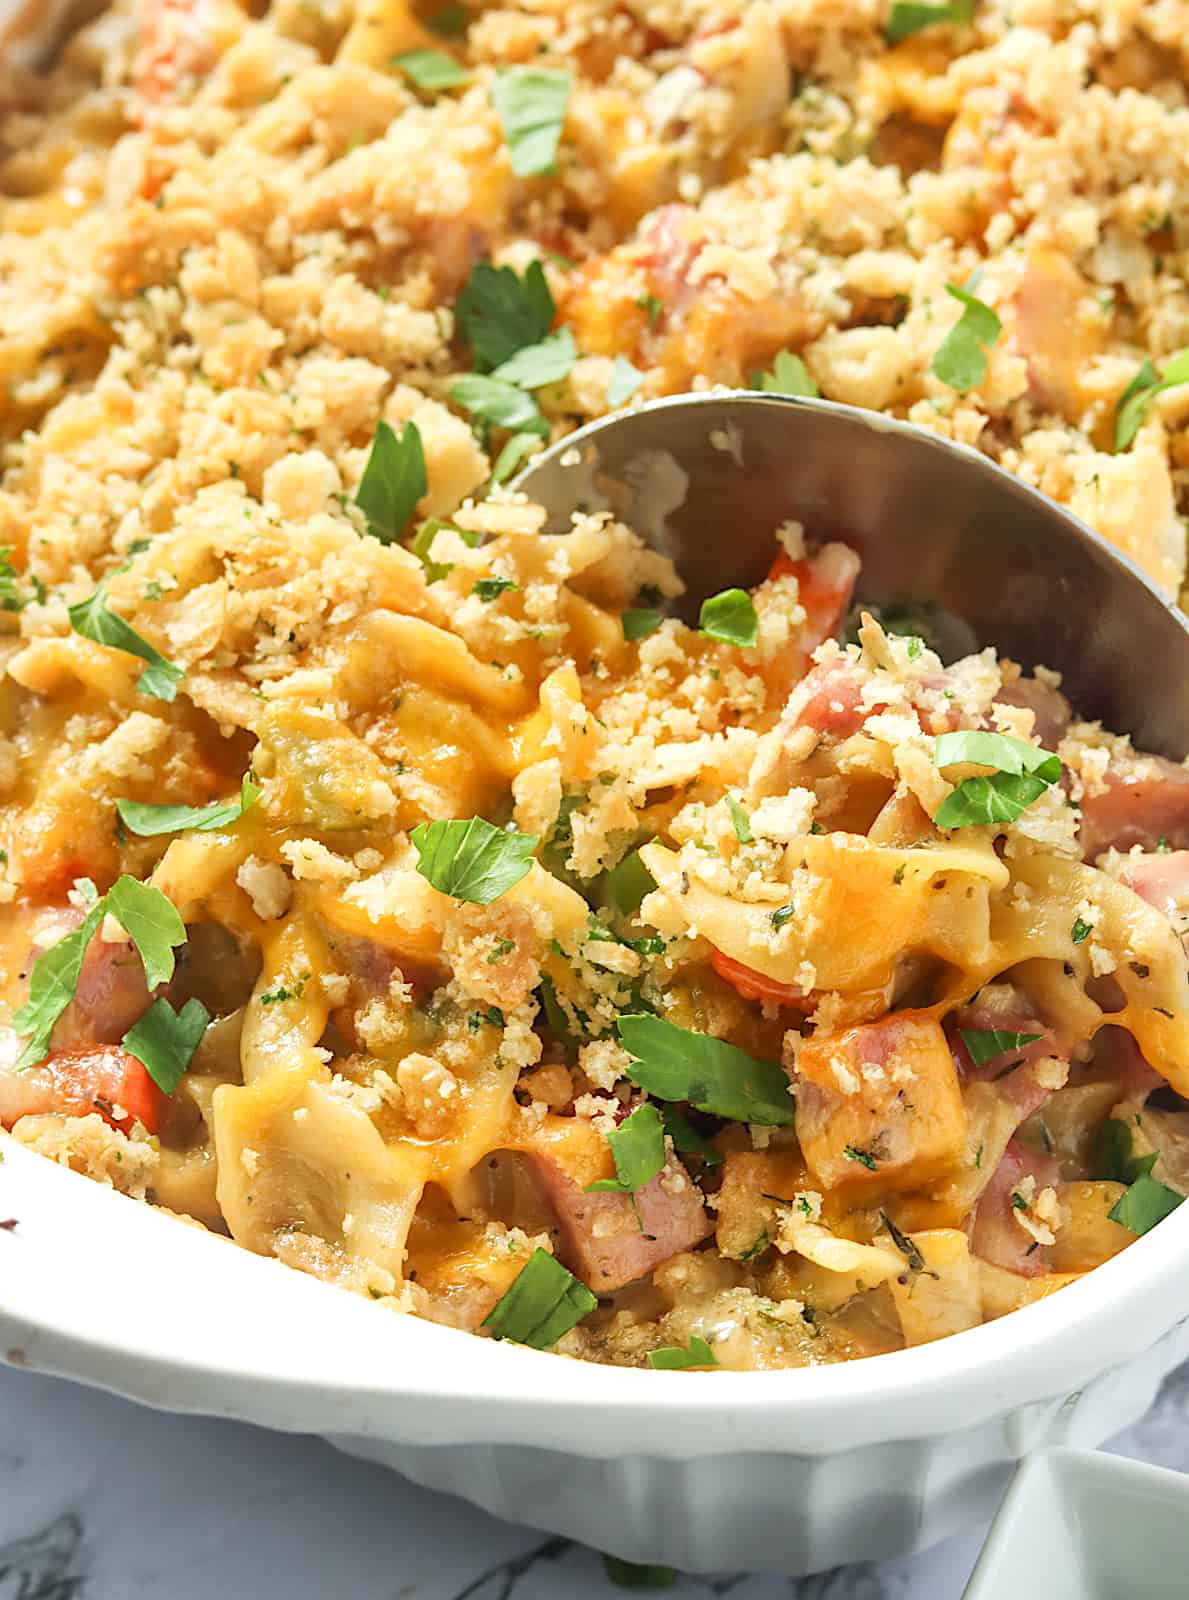 Serving up a insanely delicious ham casserole